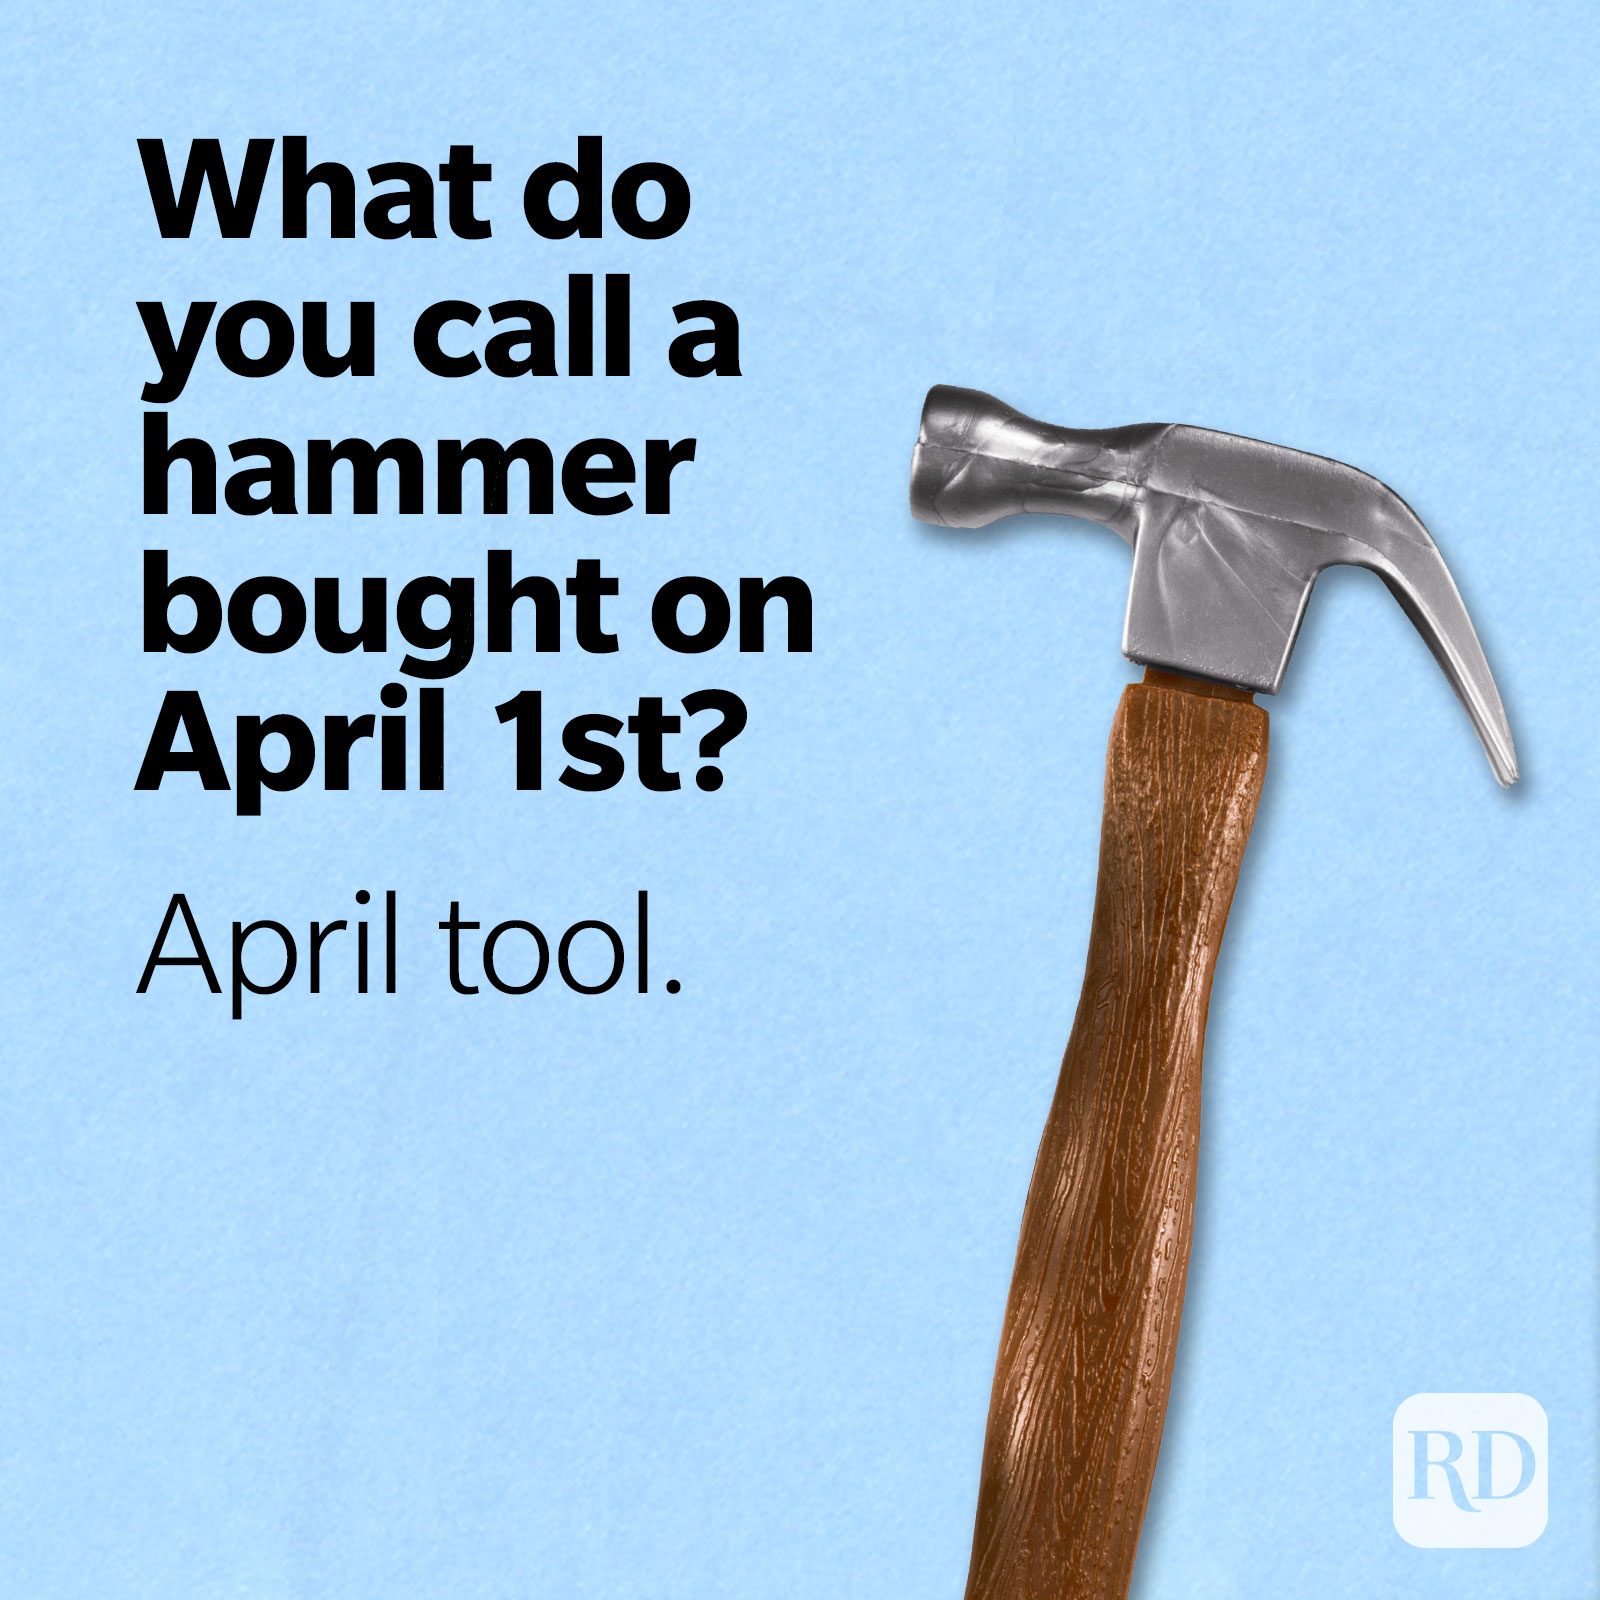 Image of hammer with text: What do you call a hammer bought on April 1st? April tool.